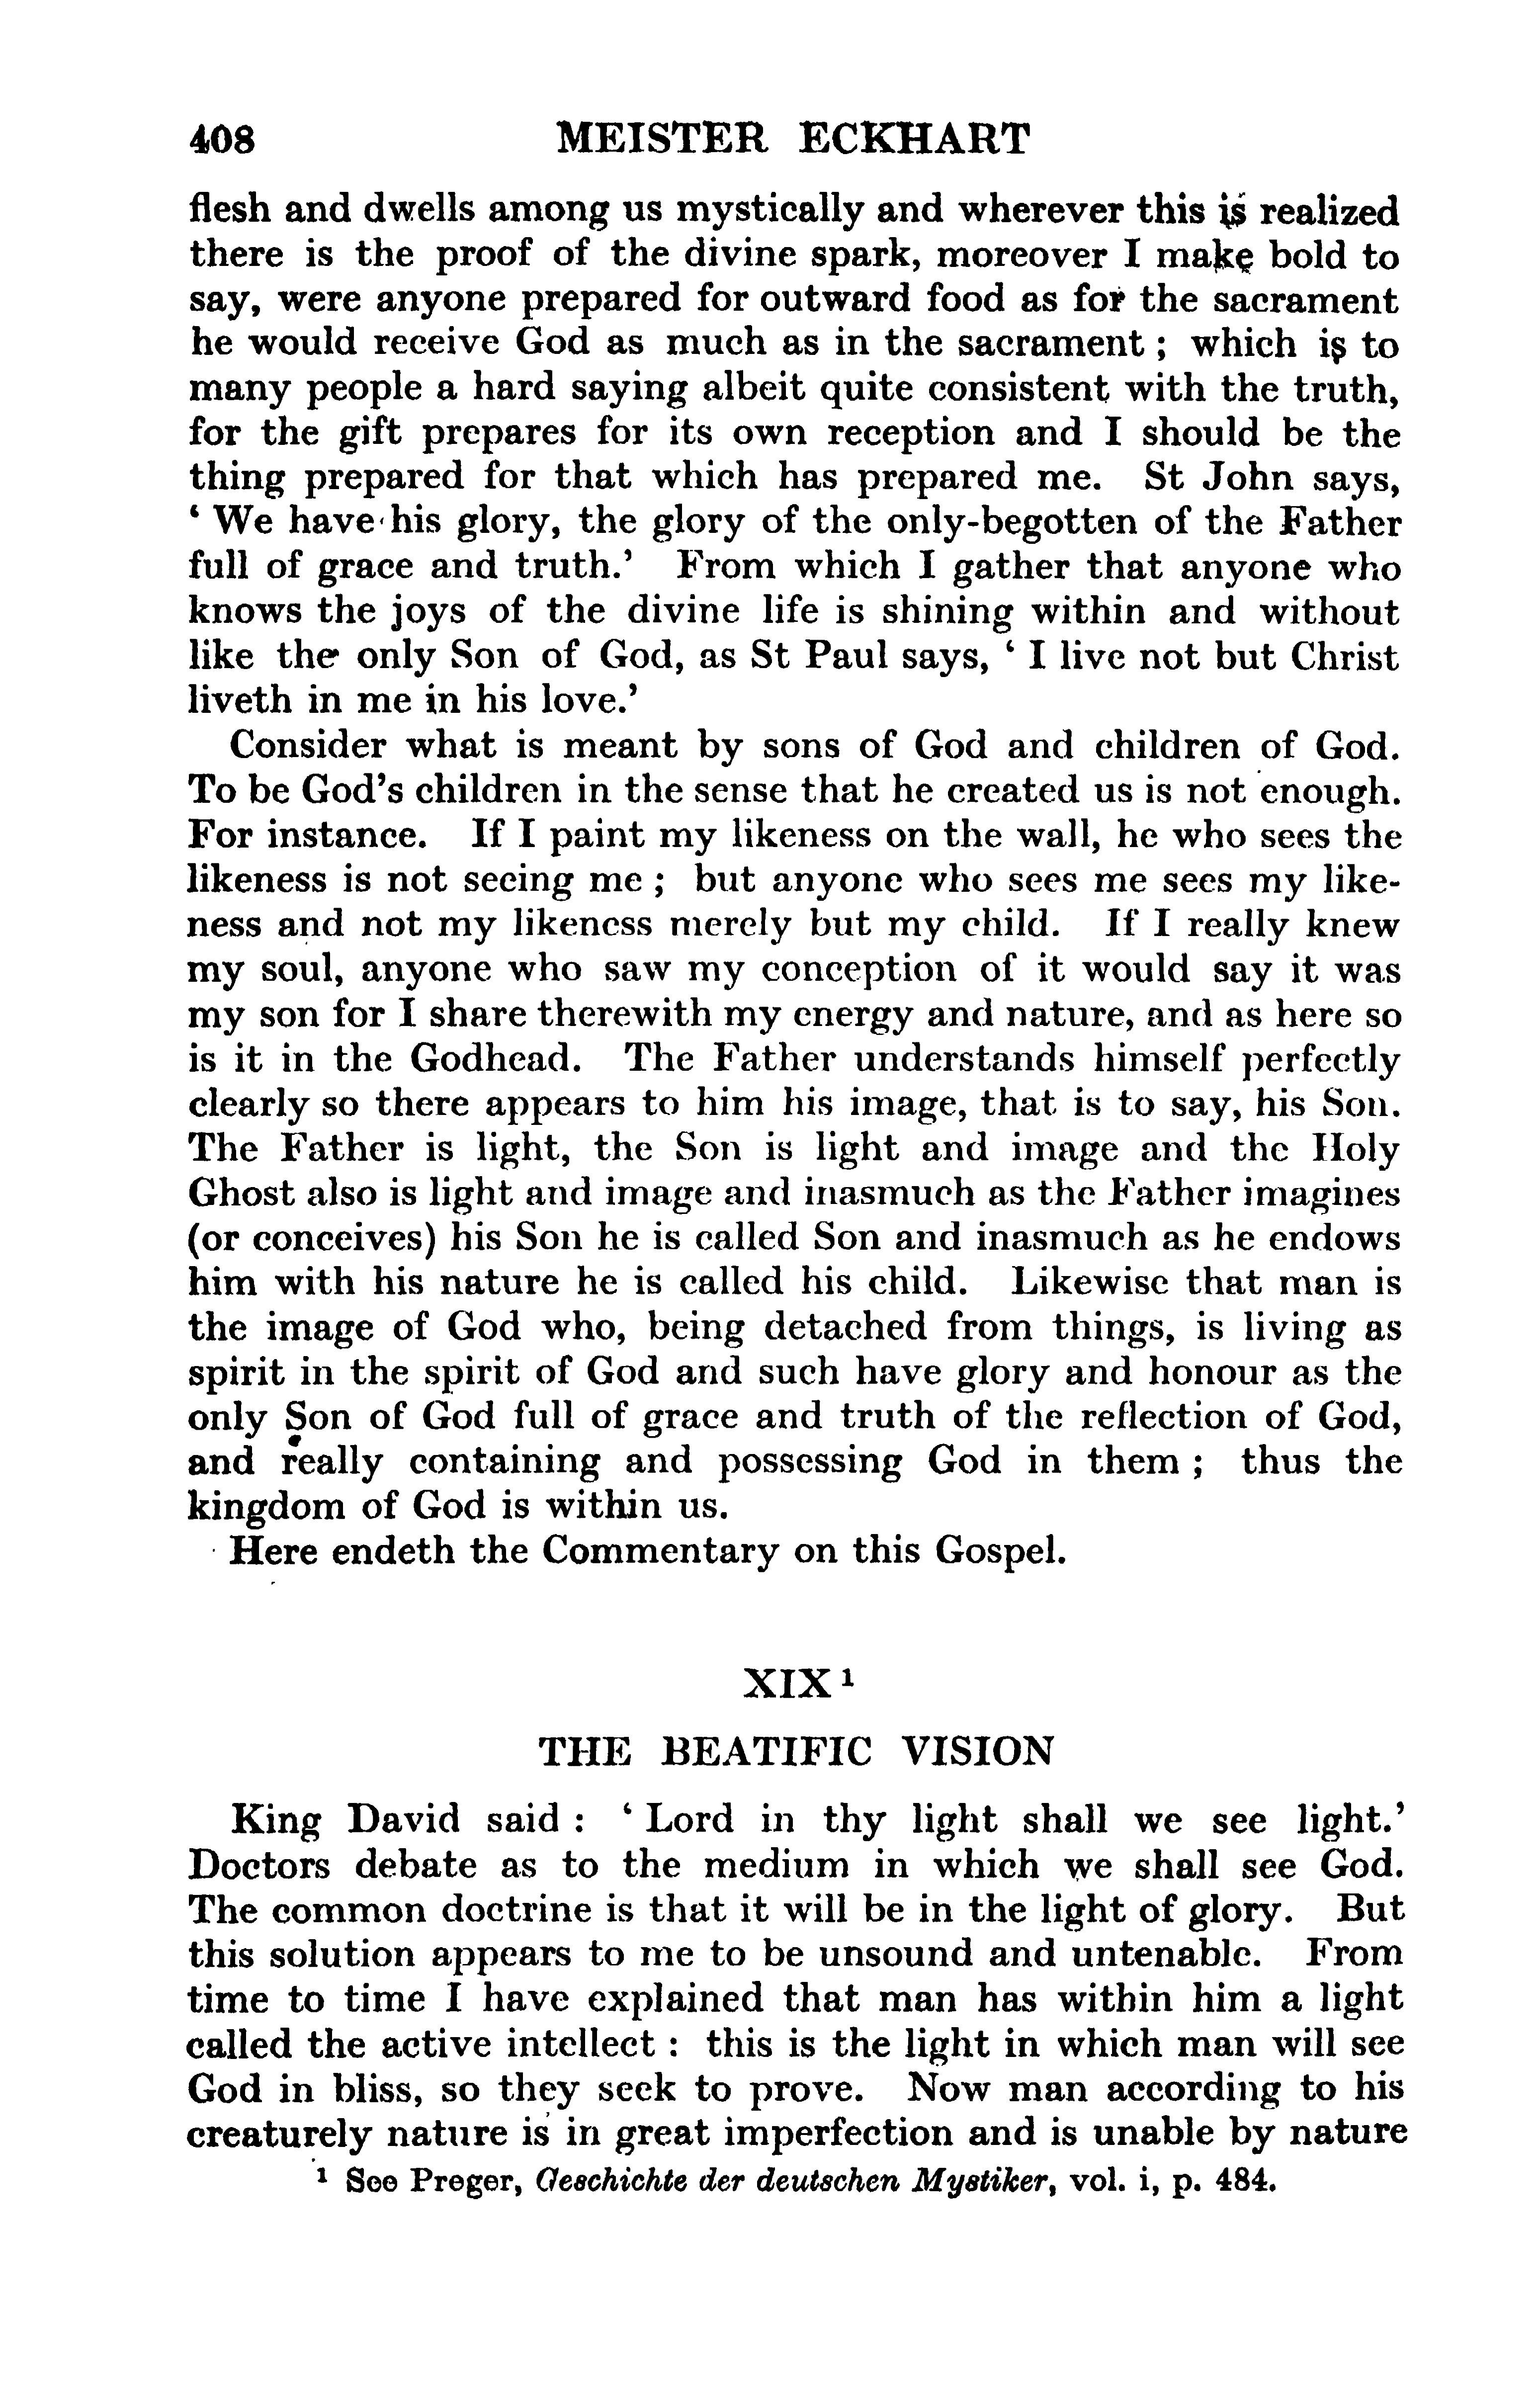 Image of page 0432